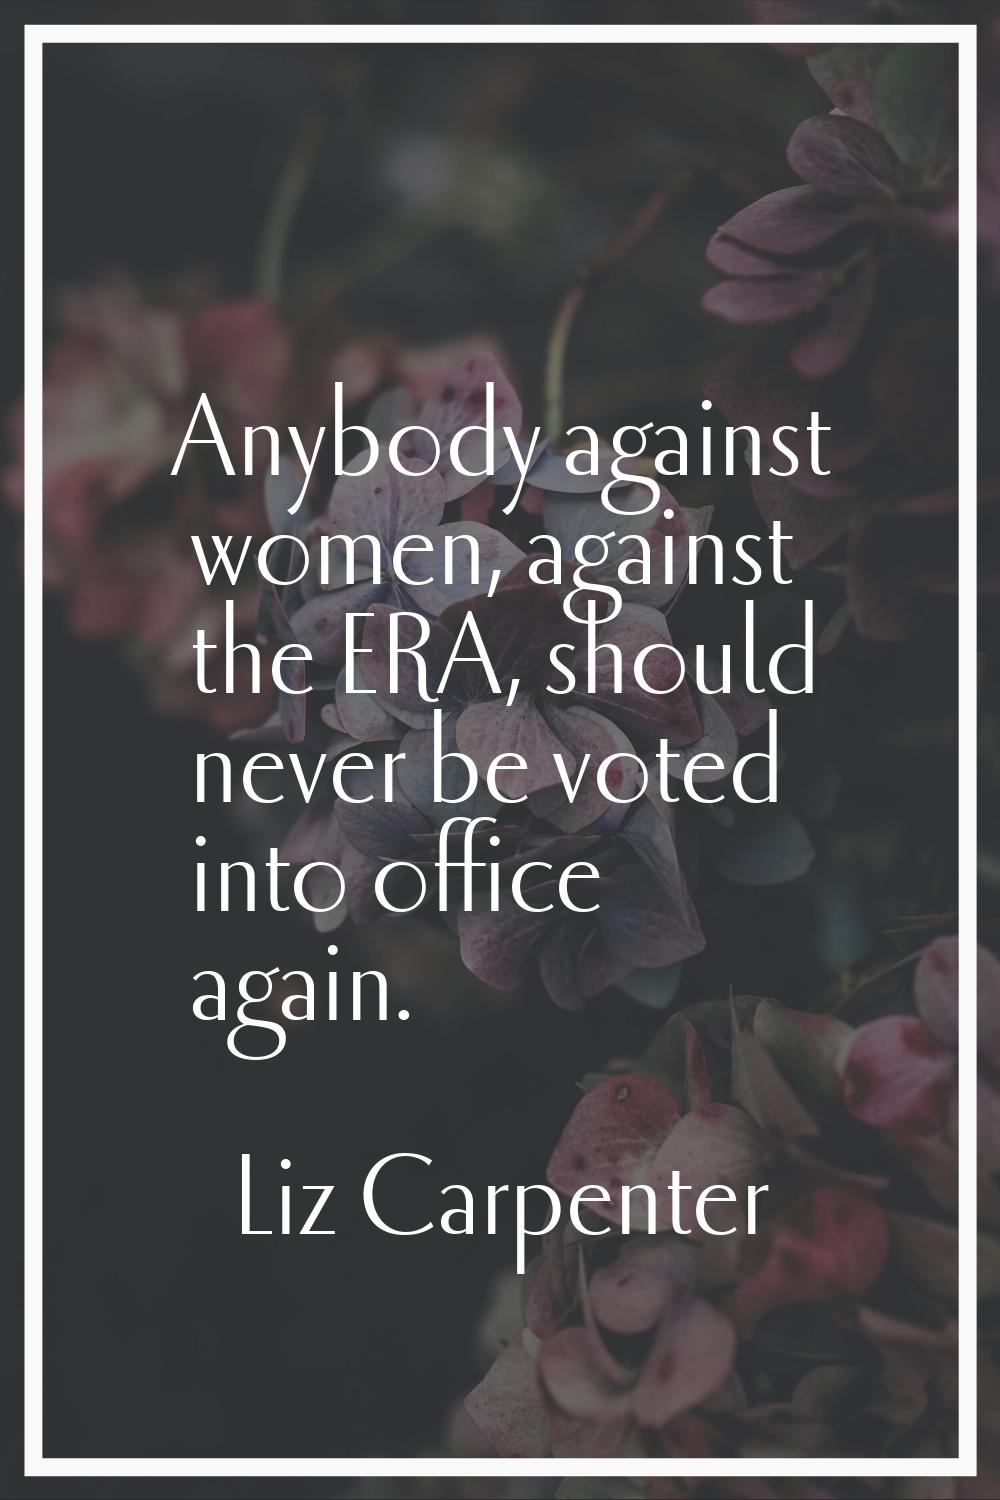 Anybody against women, against the ERA, should never be voted into office again.